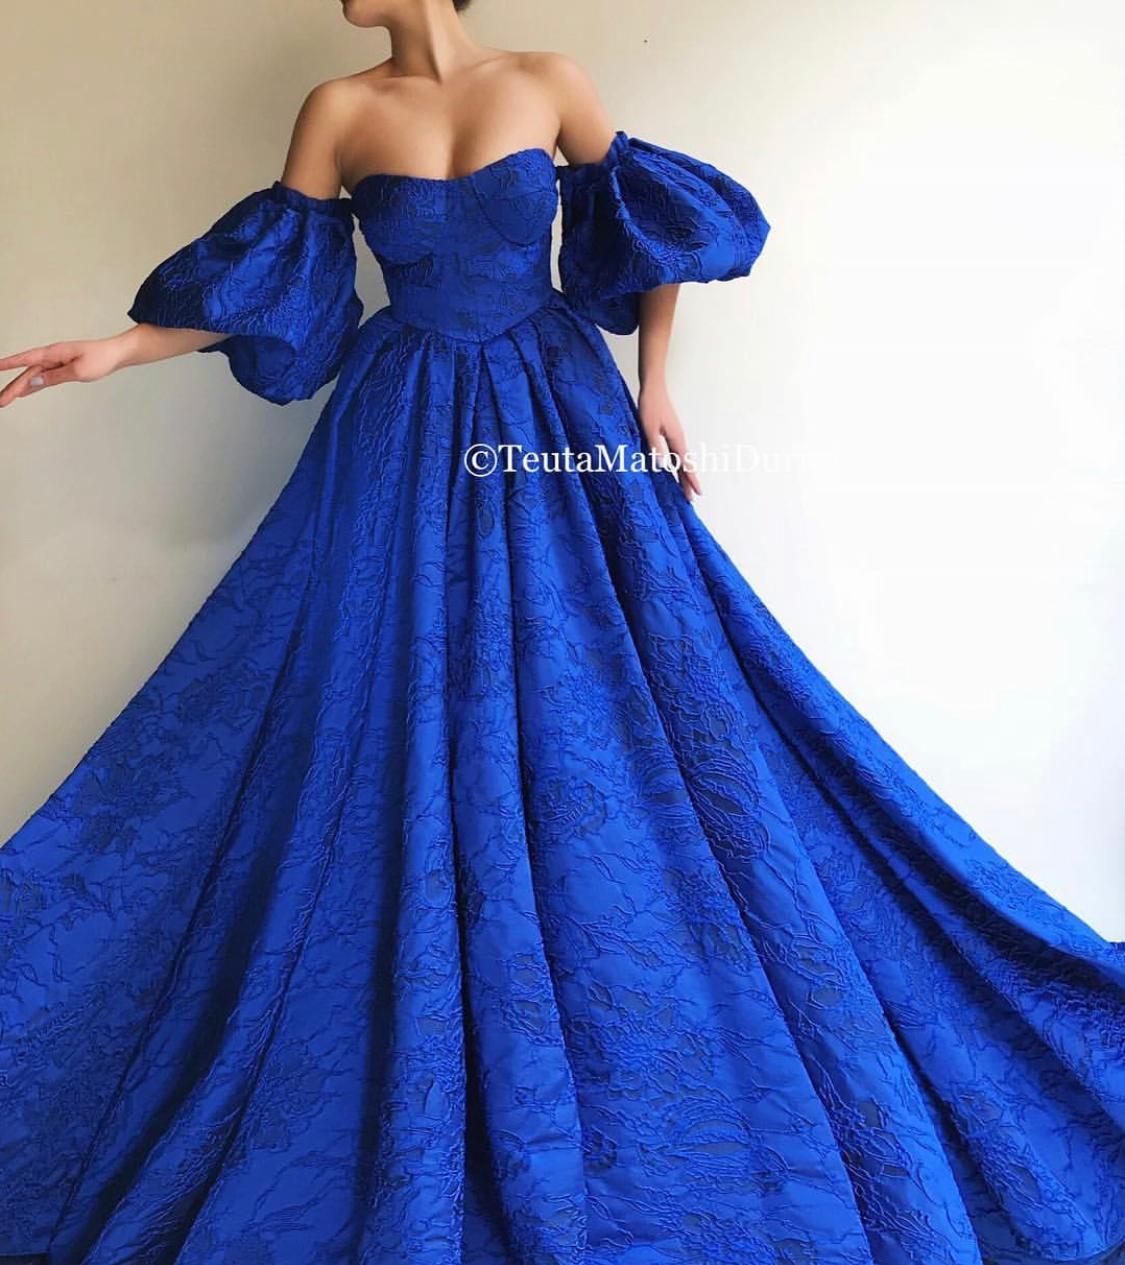 Blue A-Line dress with off the shoulder sleeves